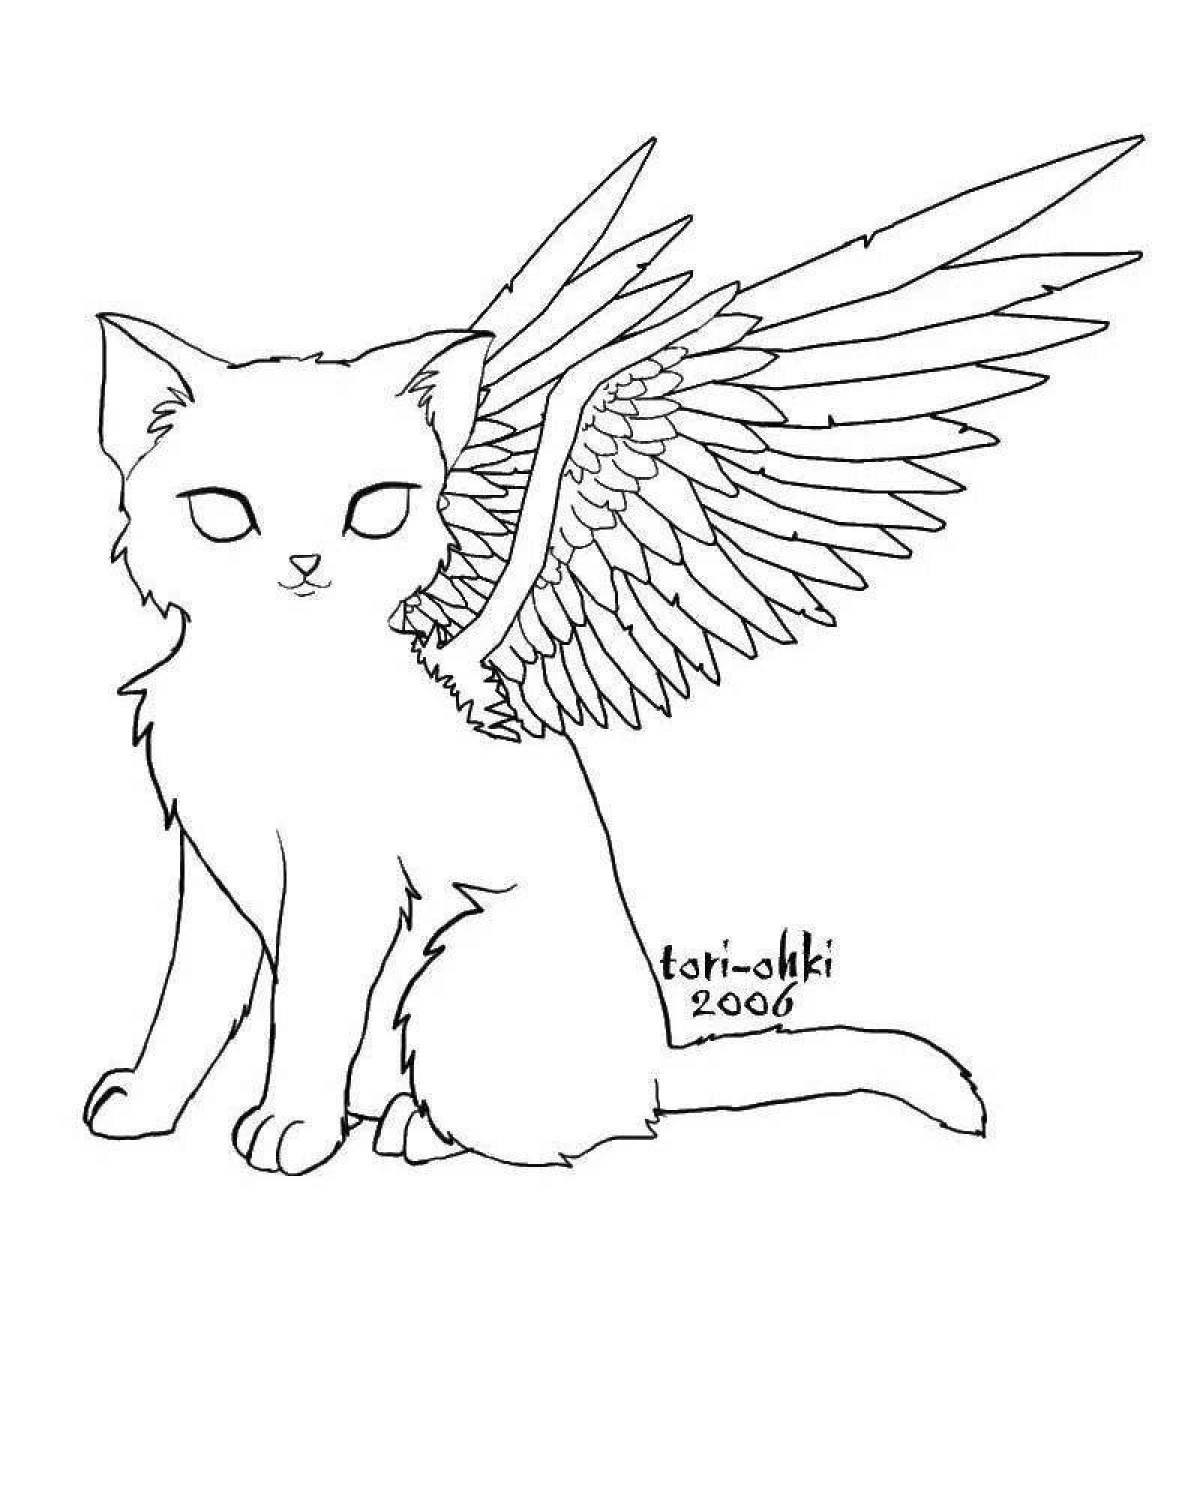 Adorable anime coloring book with wings